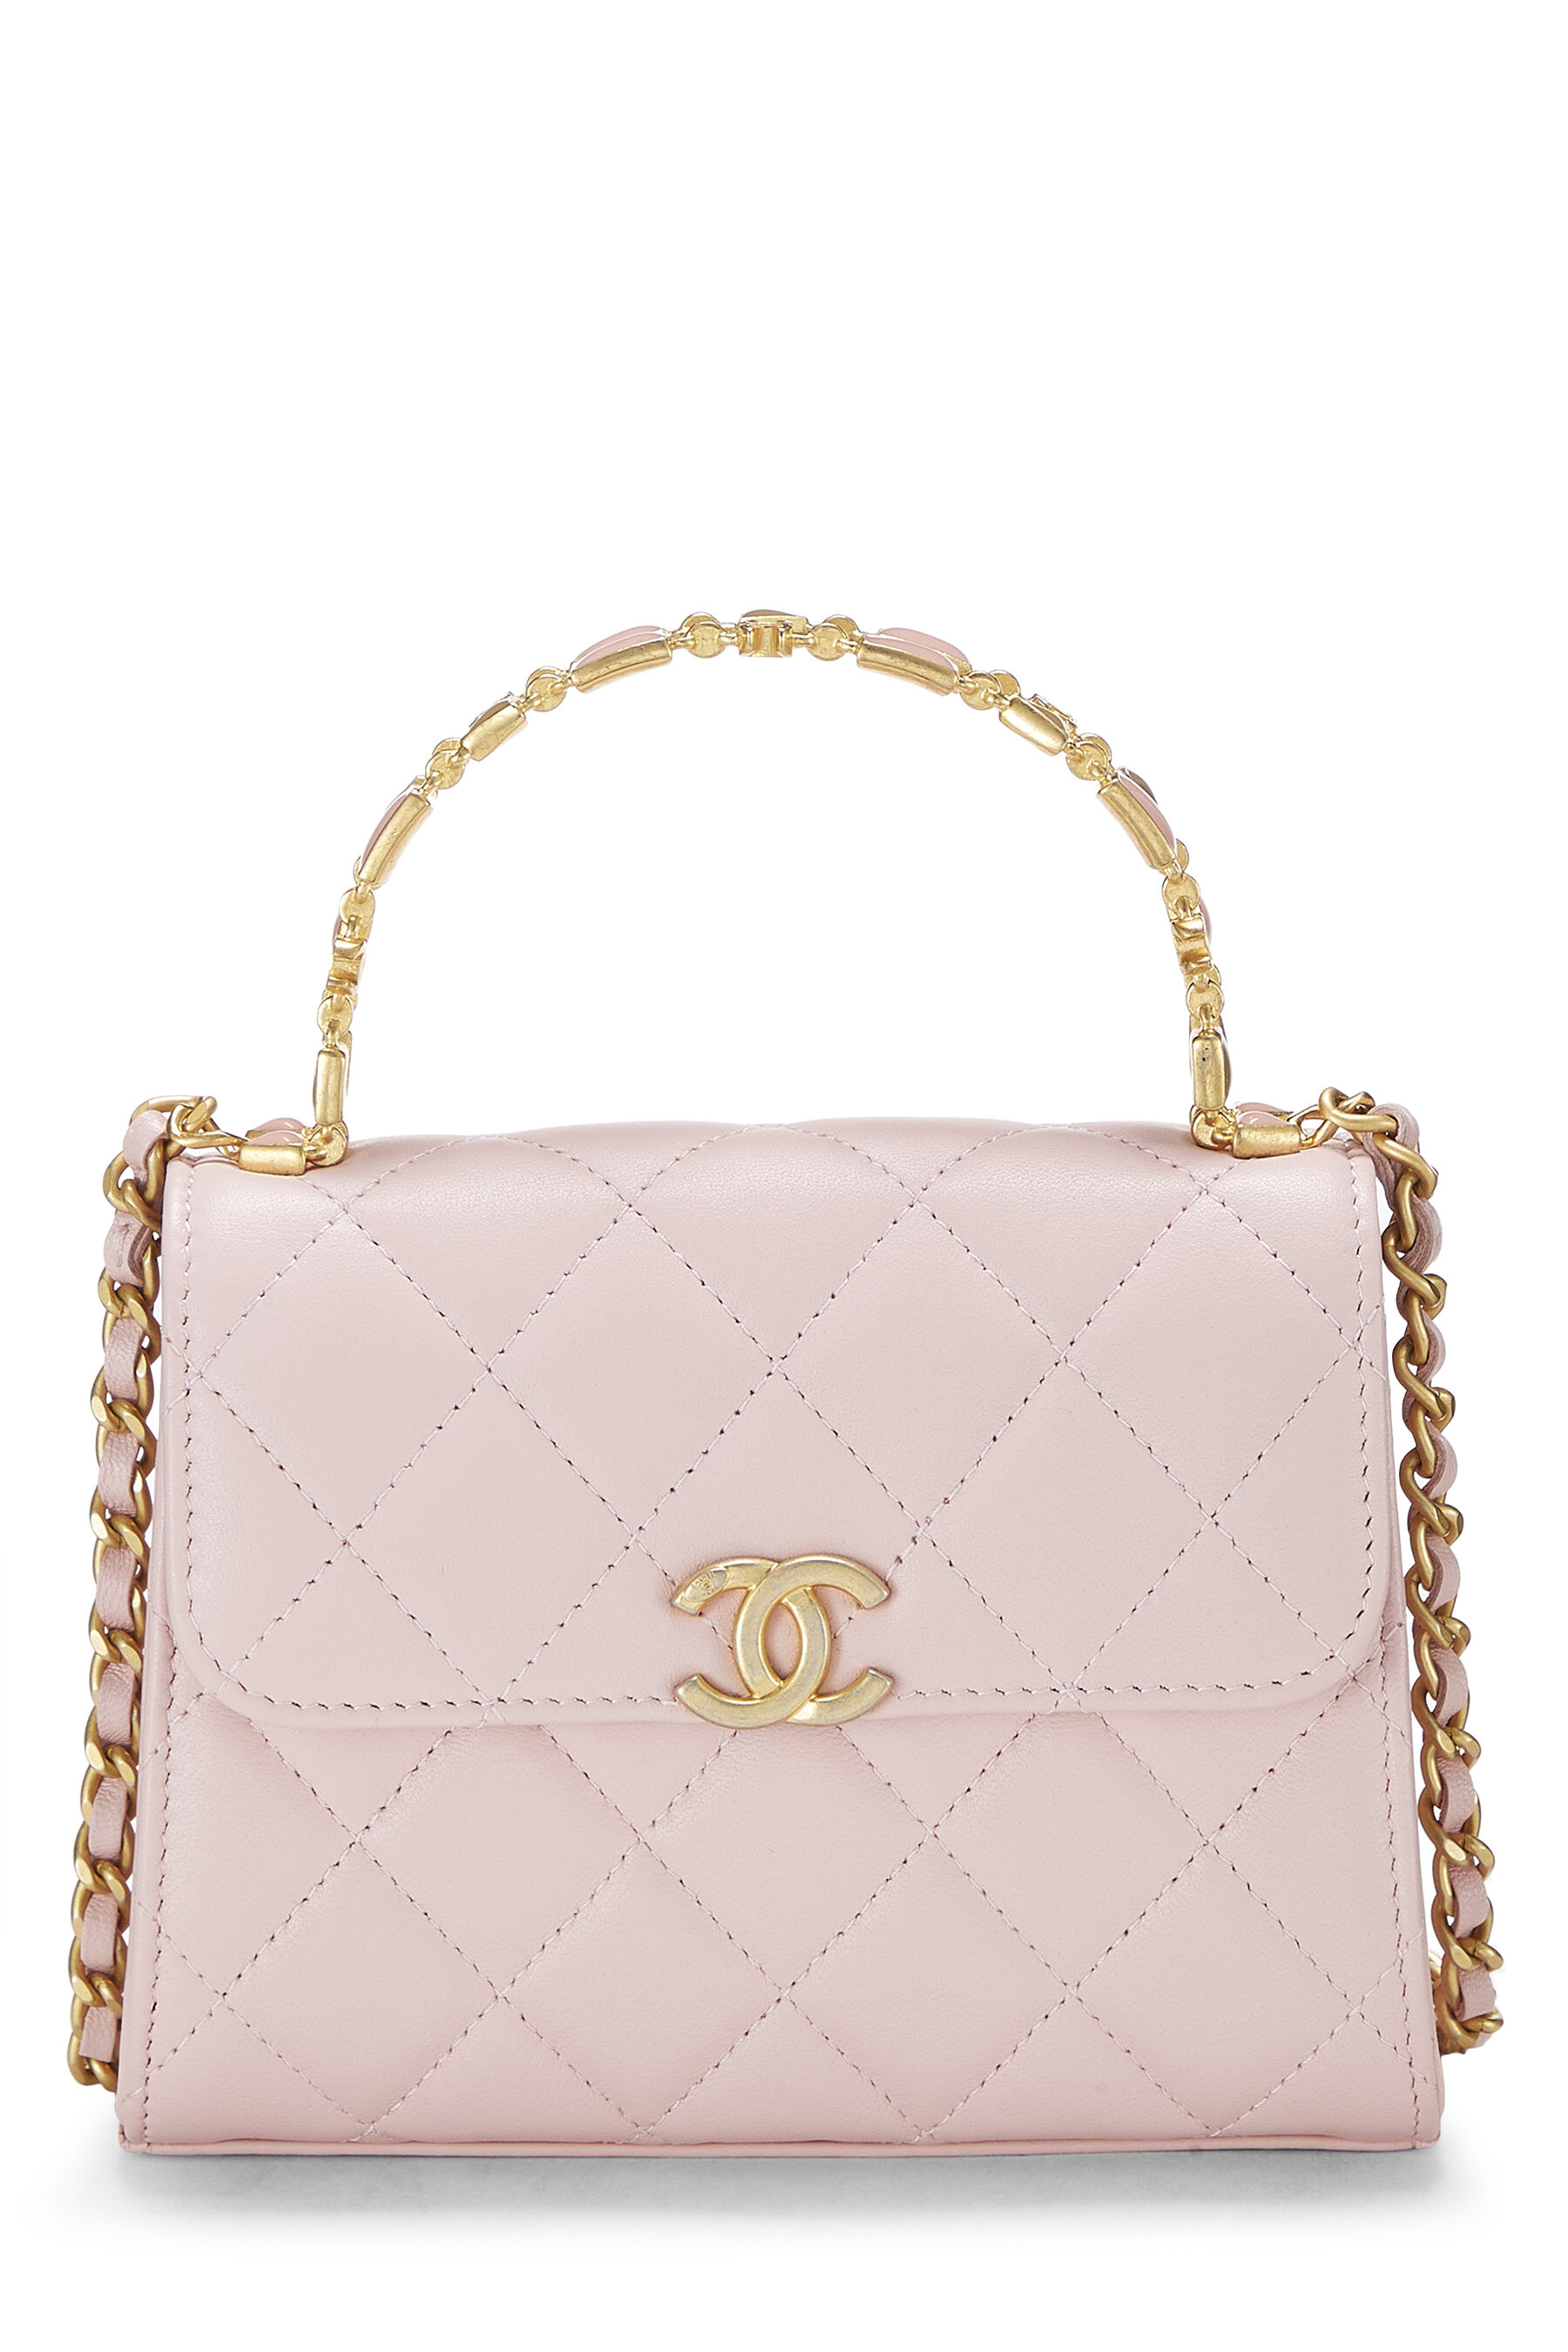 Chanel - Pink Lambskin Top Handle Long Chain Bag Small